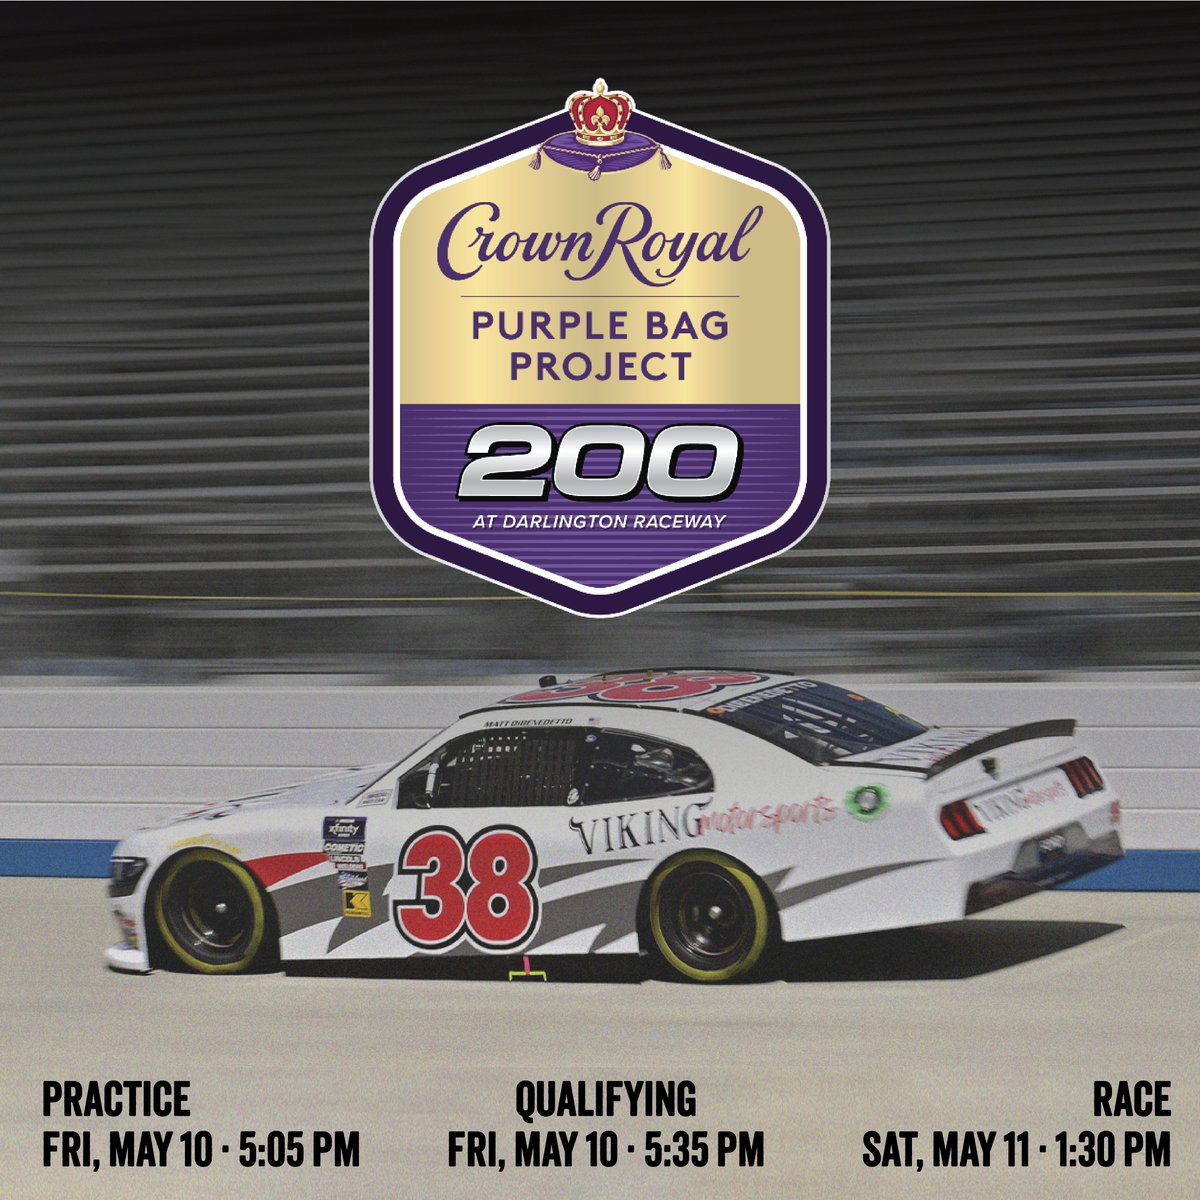 Race weekend in Darlington is underway! Practice starts at 5:05 PM, followed by qualifying at 5:35 PM. Get ready for another action-packed weekend! 🏁 🔥 #Darlington #FordPerformance #NASCAR #XfinitySeries #VikingMotorsports